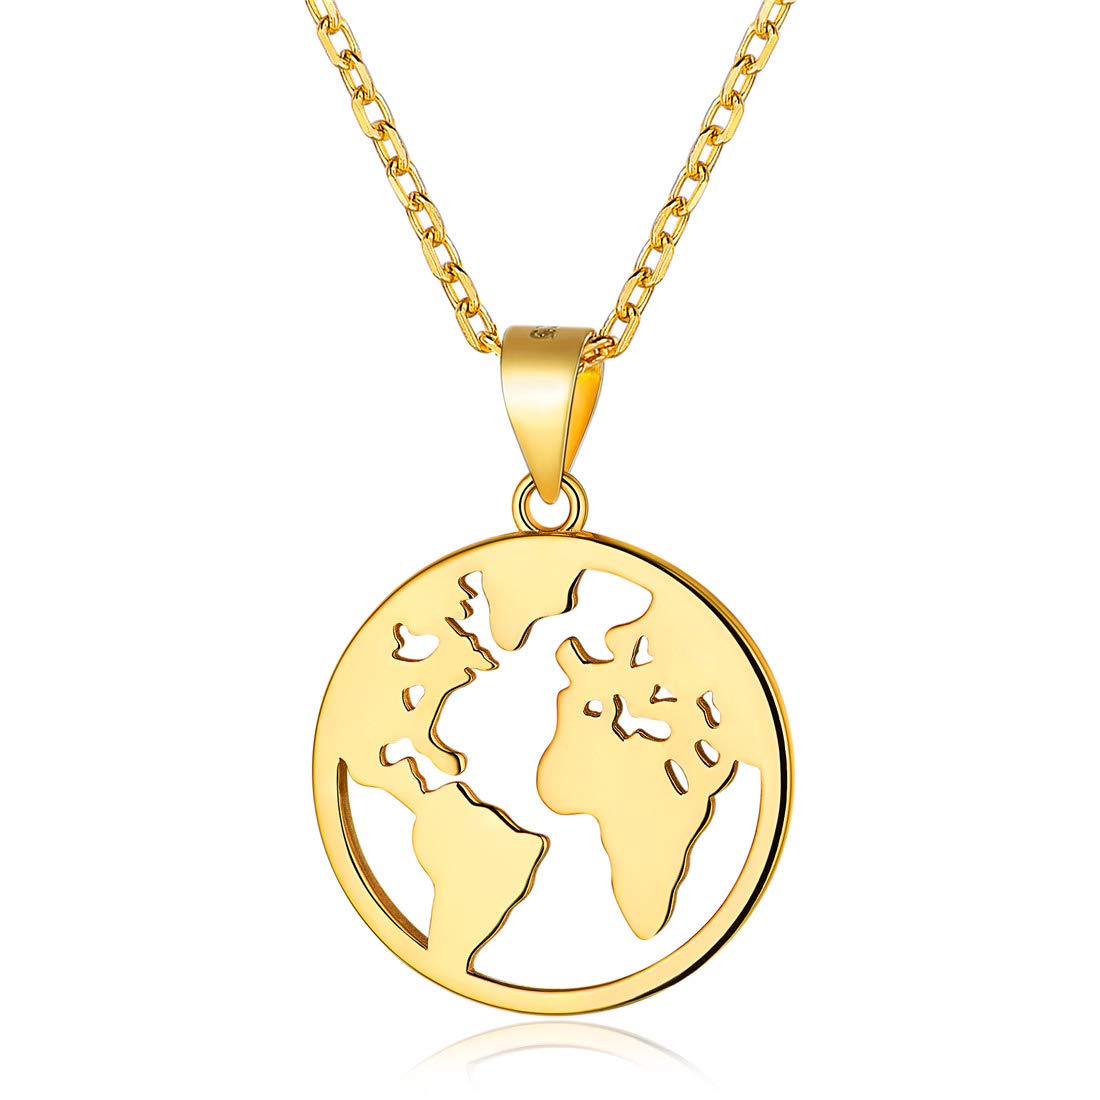 Earth Necklace 18K Gold Plated Sterling Silver World Map